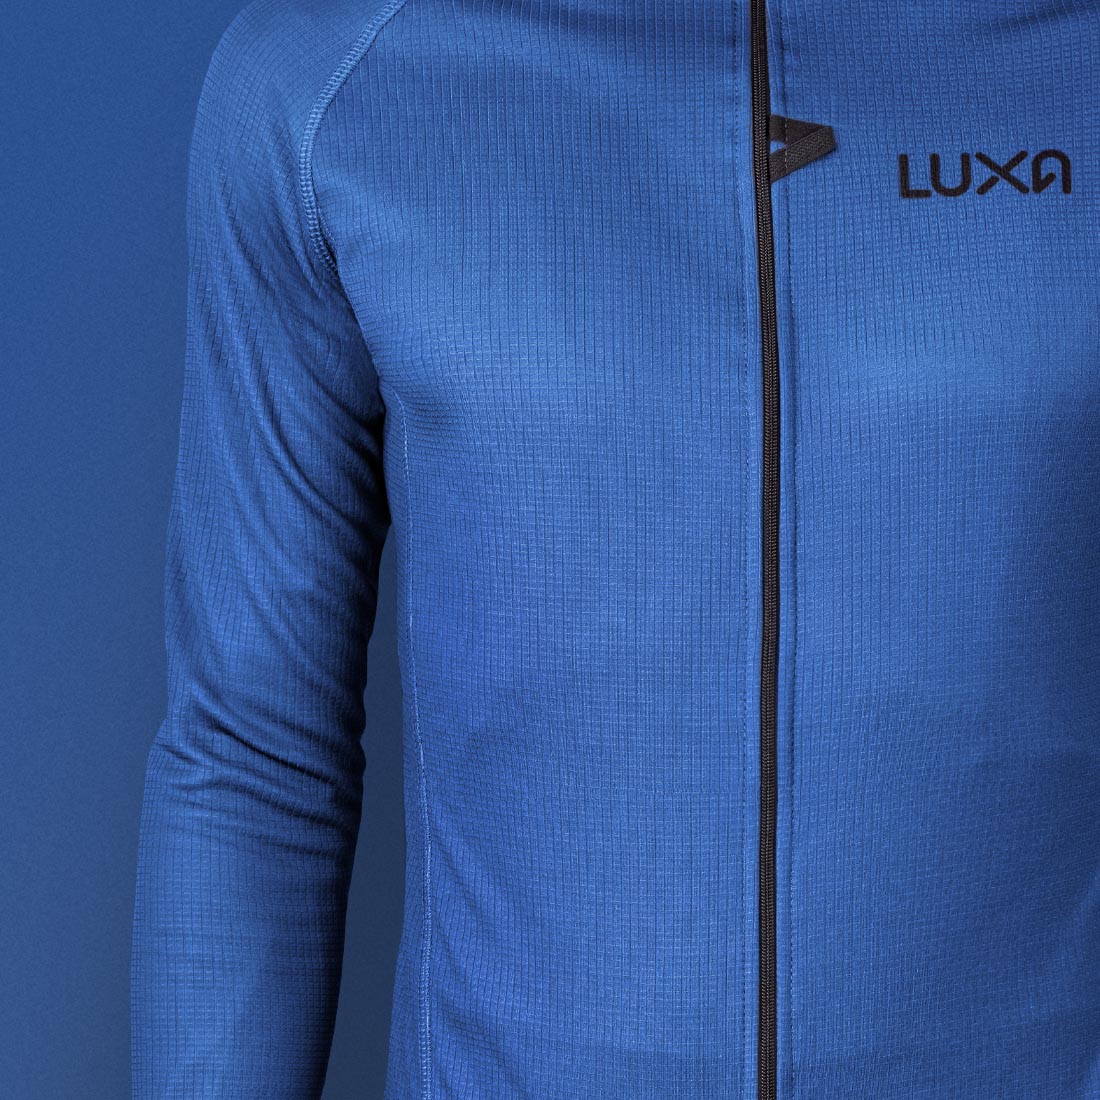 solid blue fall cycling long sleeve jacket insulated and warm made by Luxa in Europe